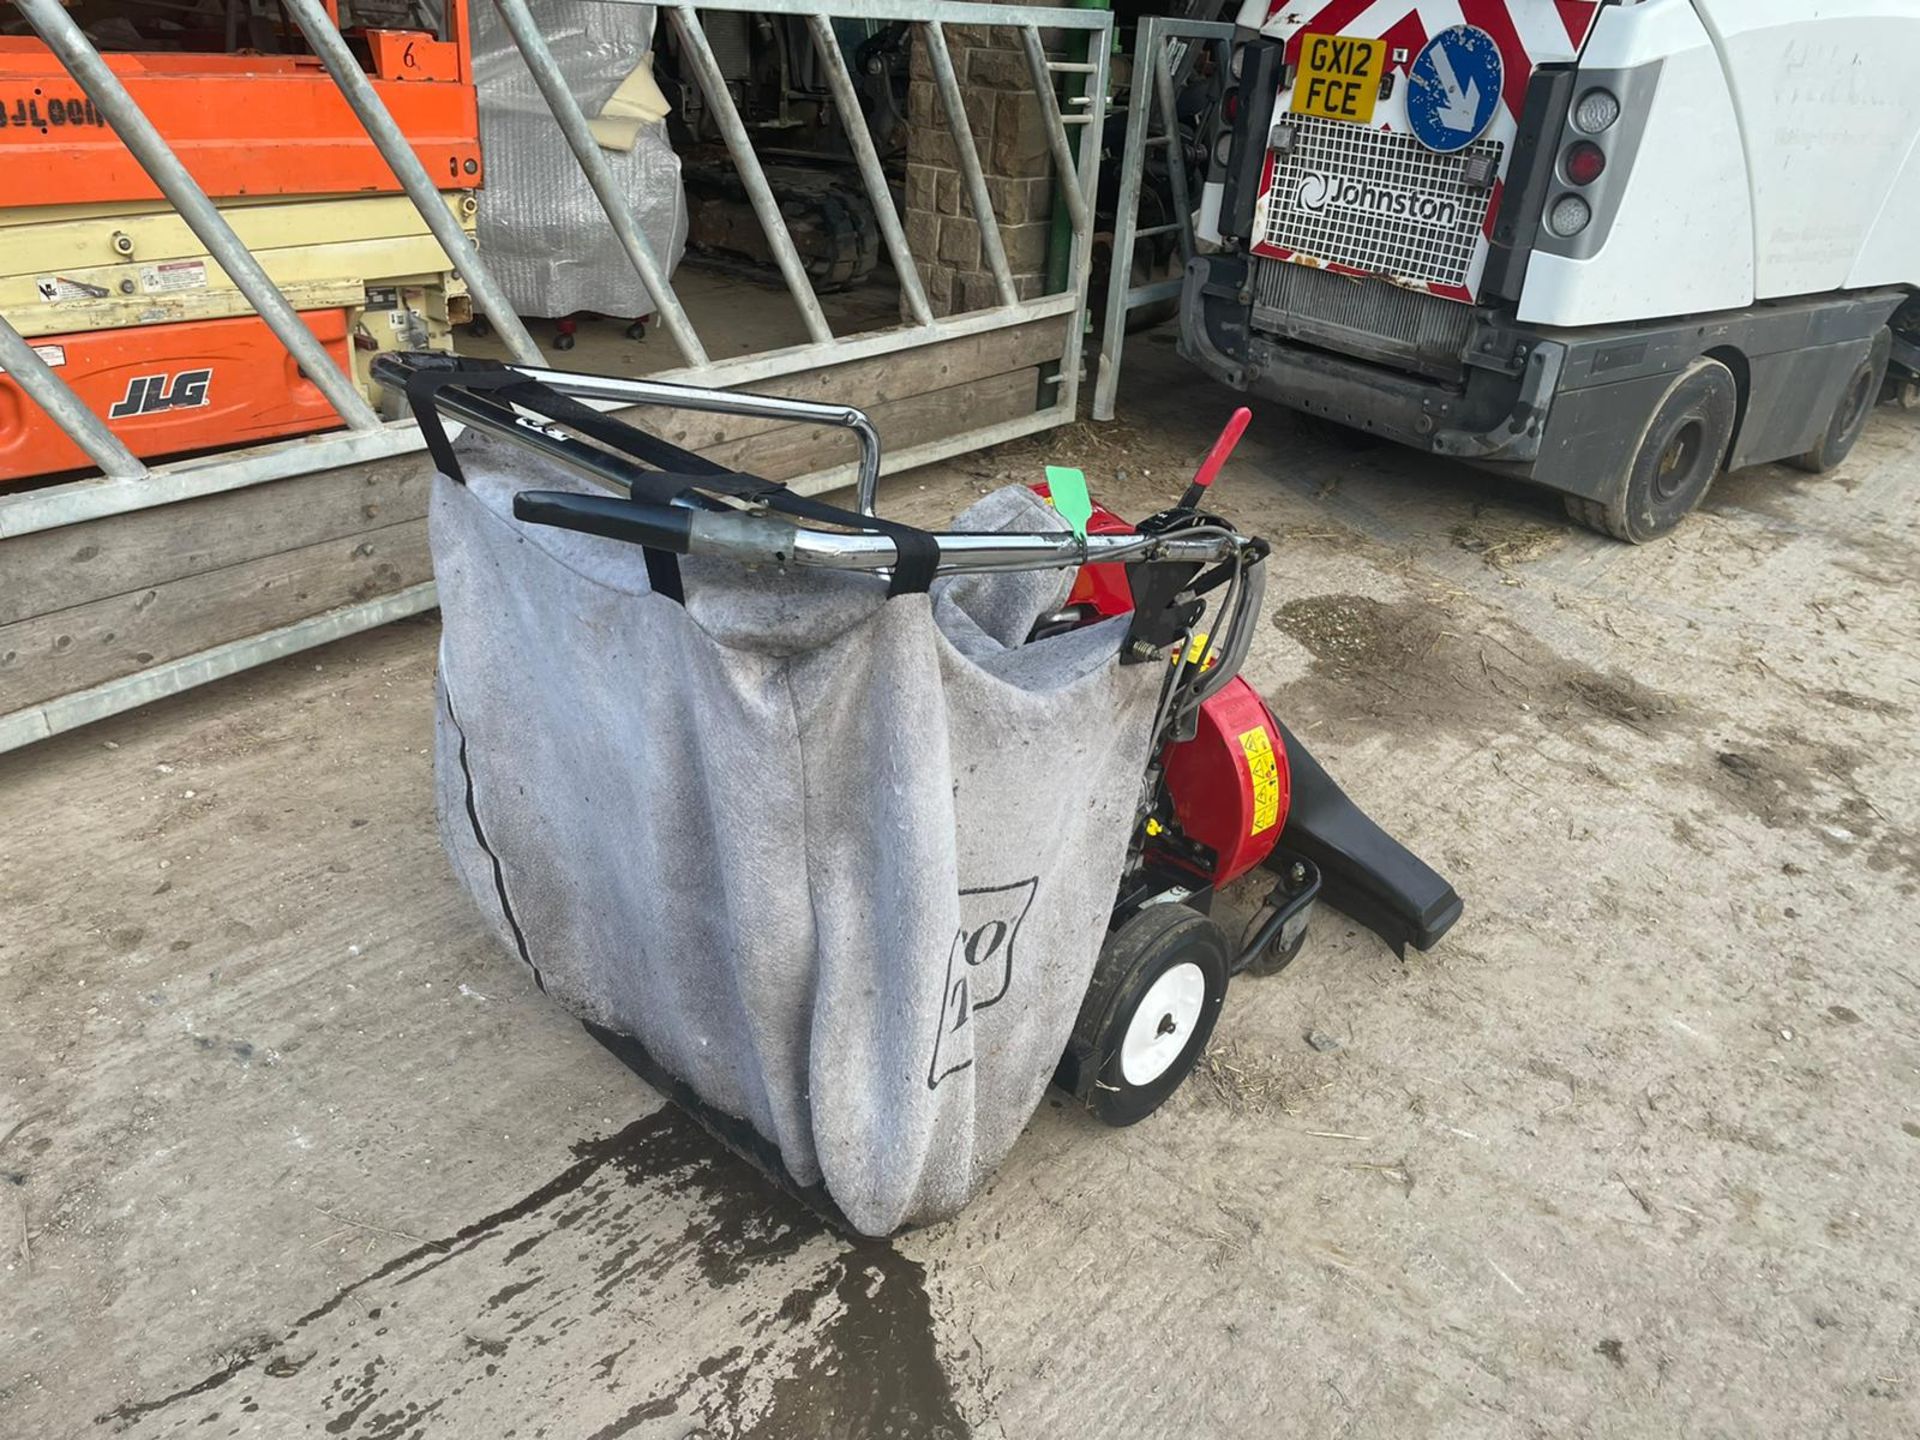 TORO VACCUM BLOWER, SELF PROPELLED, IN USED BUT GOOD CONDITION *PLUS VAT* - Image 4 of 7